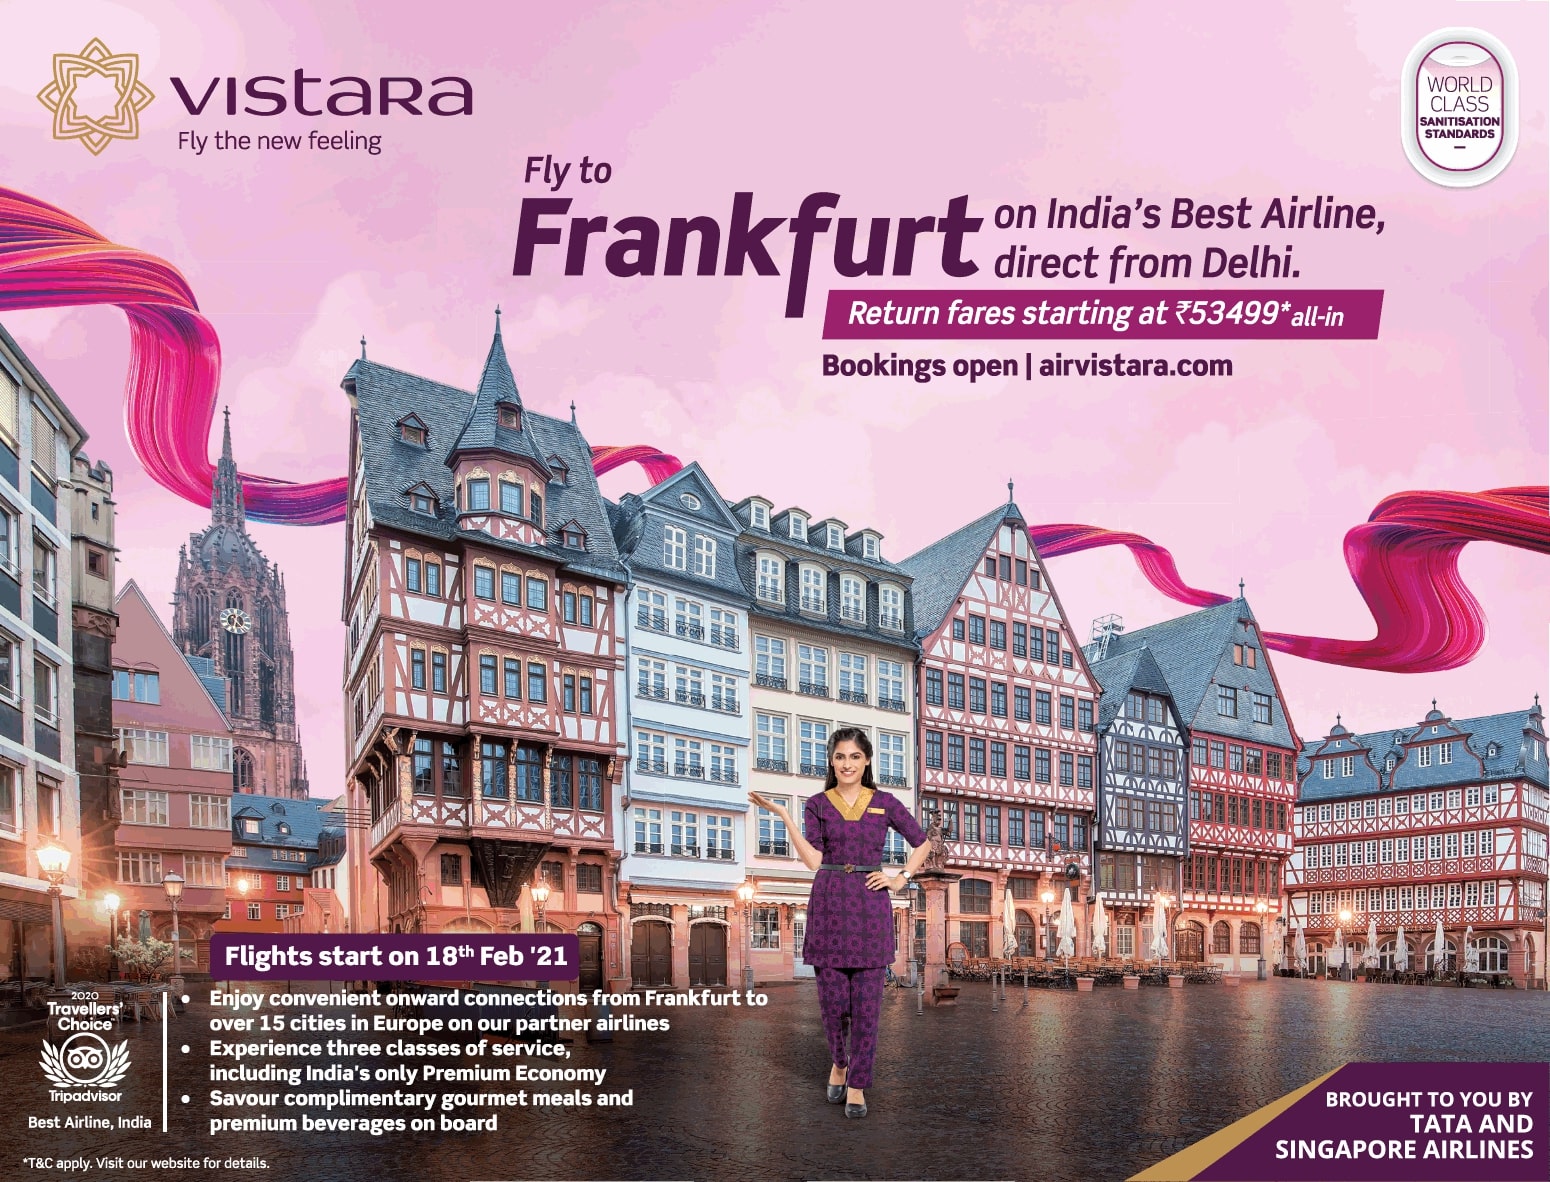 vistara-fly-the-new-feeling-fly-to-frankfurt-on-indias-best-airline-direct-from-delhi-ad-times-of-india-delhi-12-01-2021